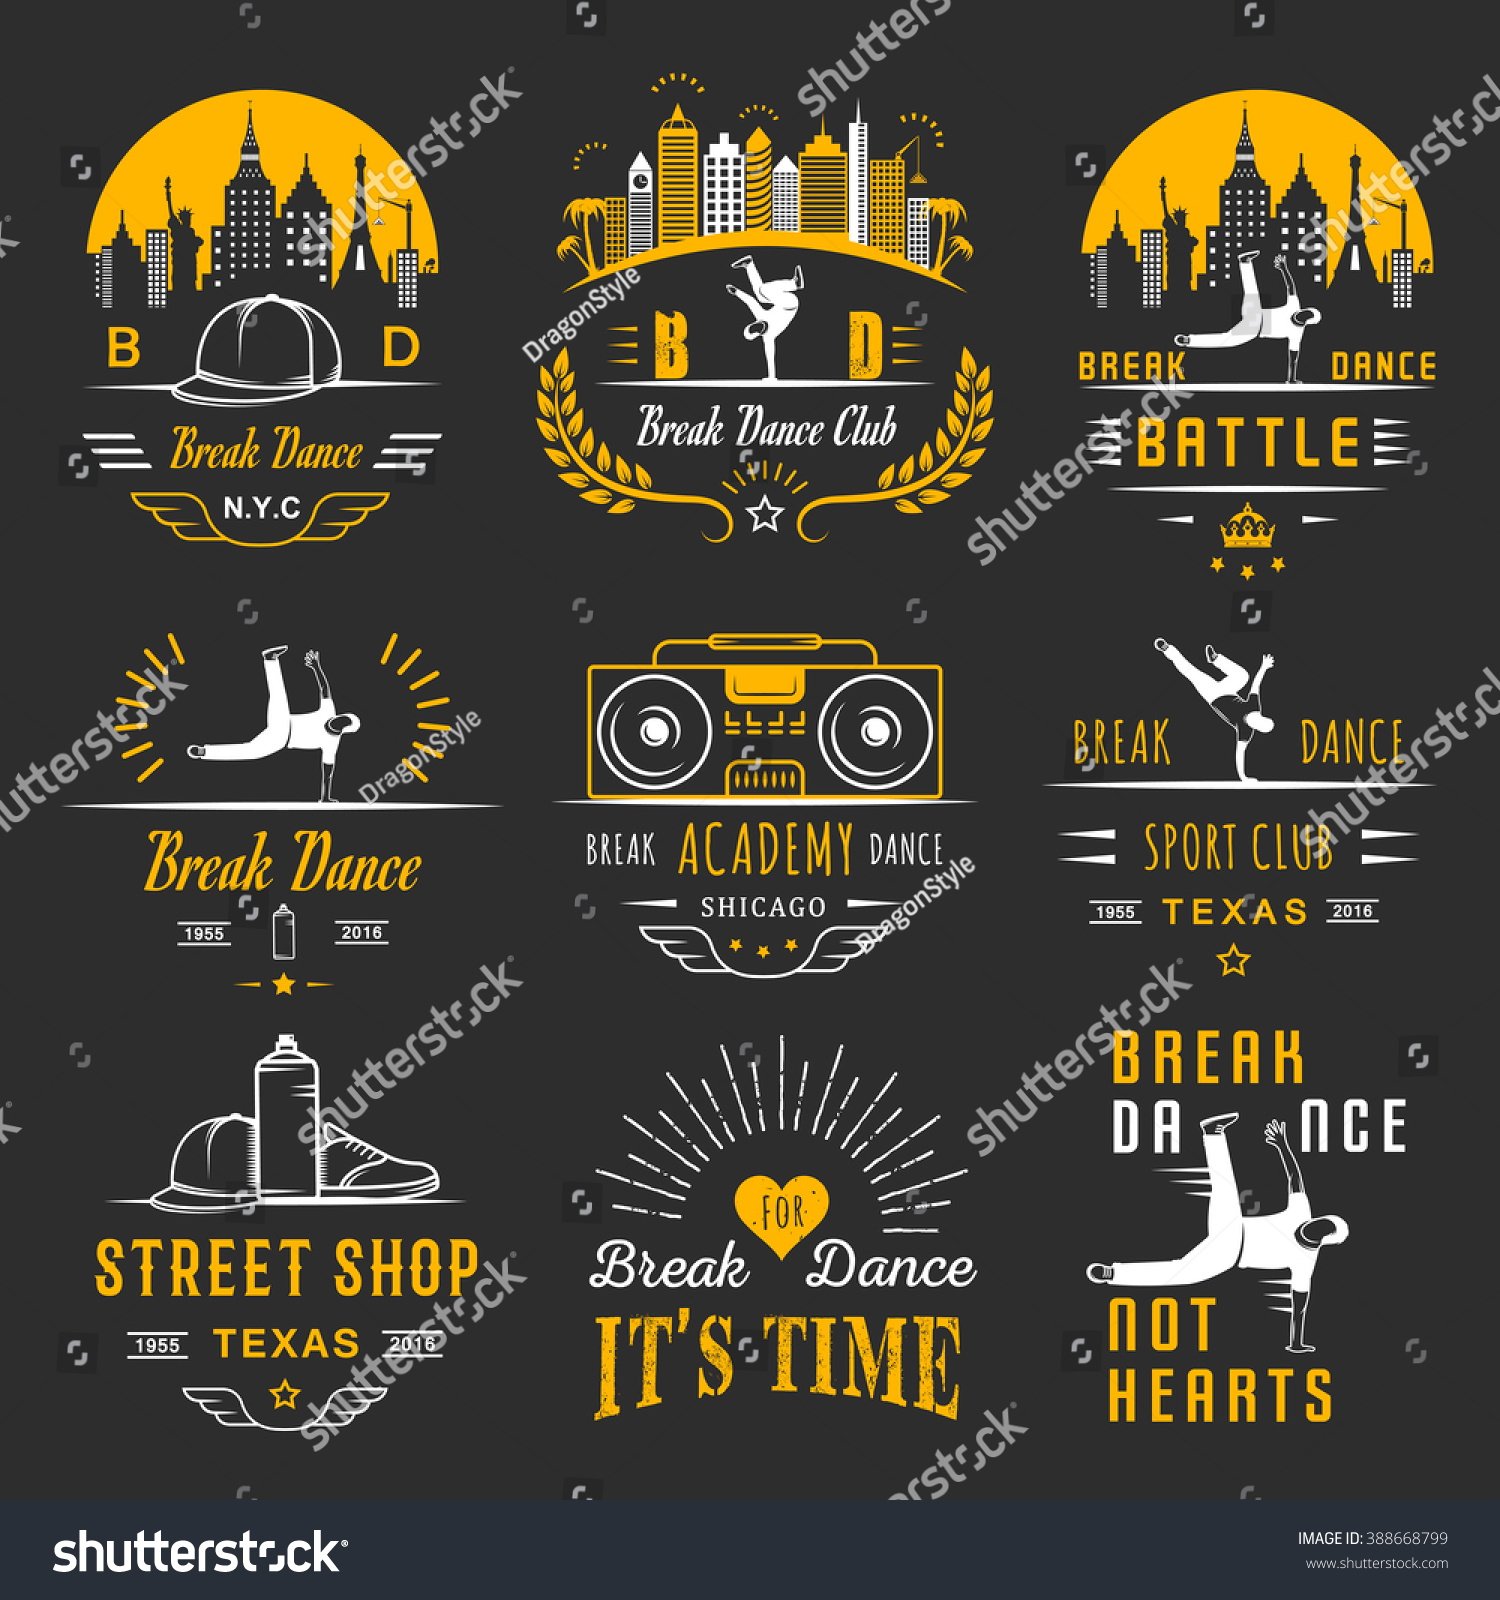 SVG of Set of Breakdance Bboy Silhouettes in Different Poses. Collection logo and badges hip-hop school, academy, break dance battle, club, cup and league. Sign Hip-hop, graffiti and street dance. svg